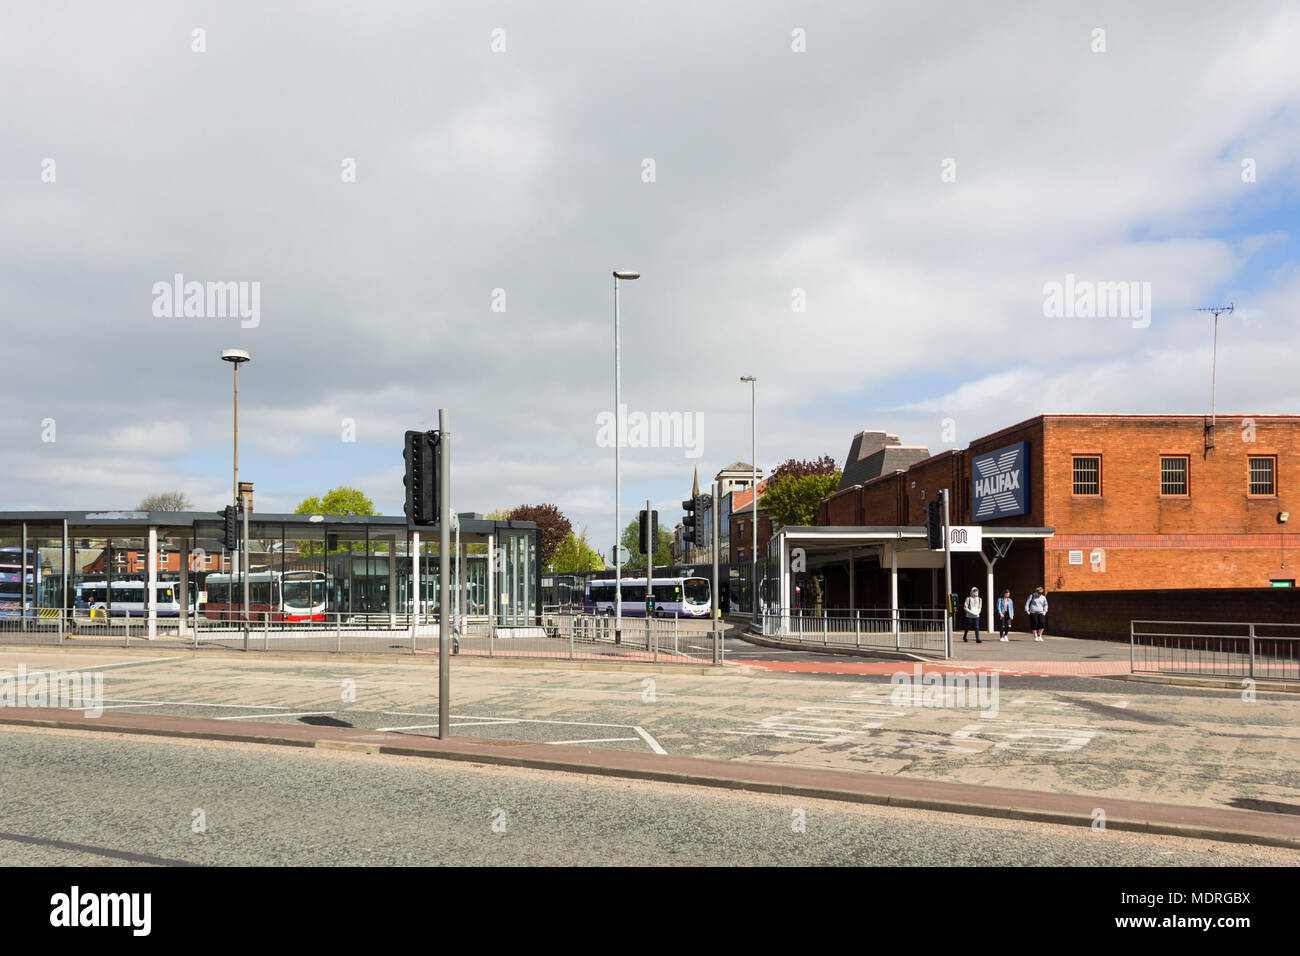 Bury bus station in Greater Manchester showing its exit onto Angouleme Way. Stock Photo